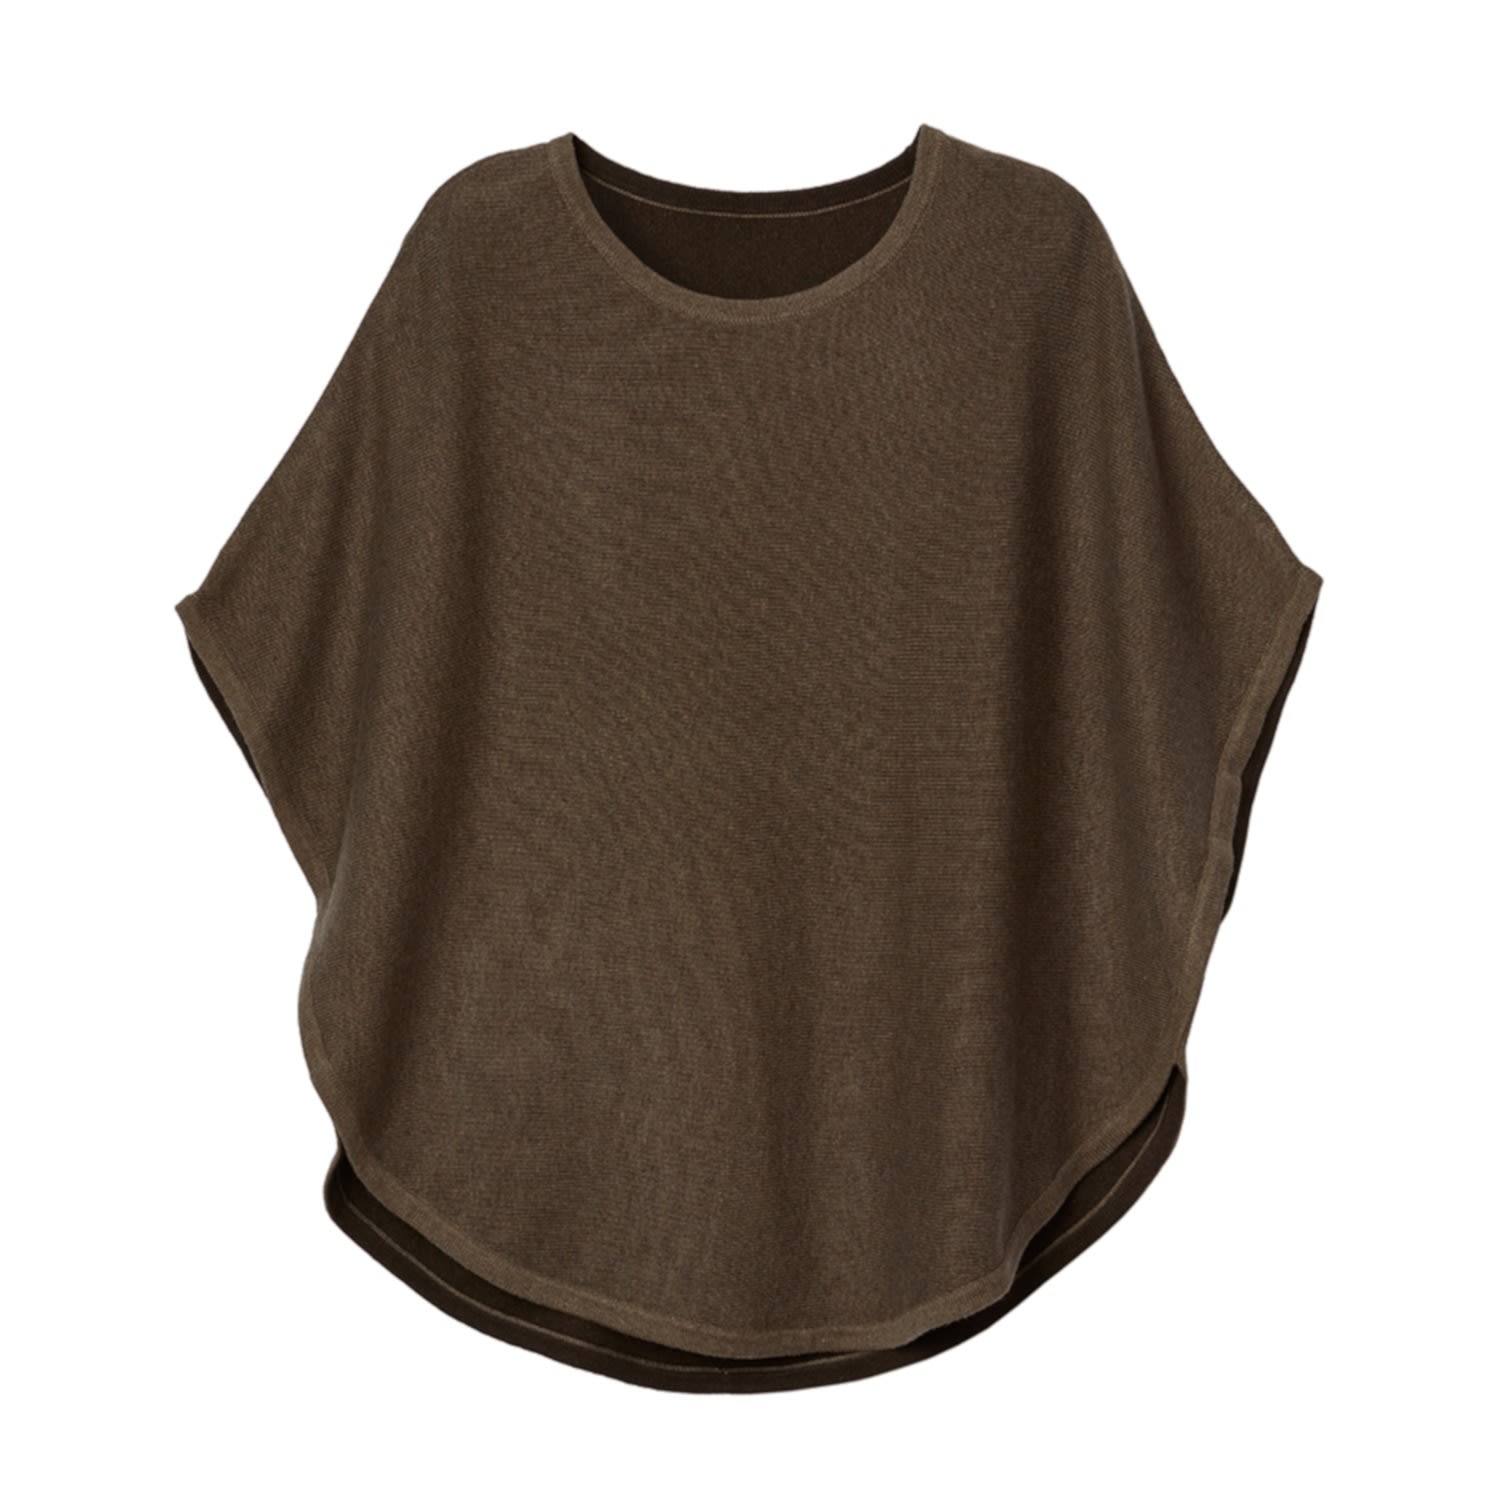 Women’s Brown Flora Cotton Cashmere Reversible Poncho Taupe & Brazil Nut One Size Cove